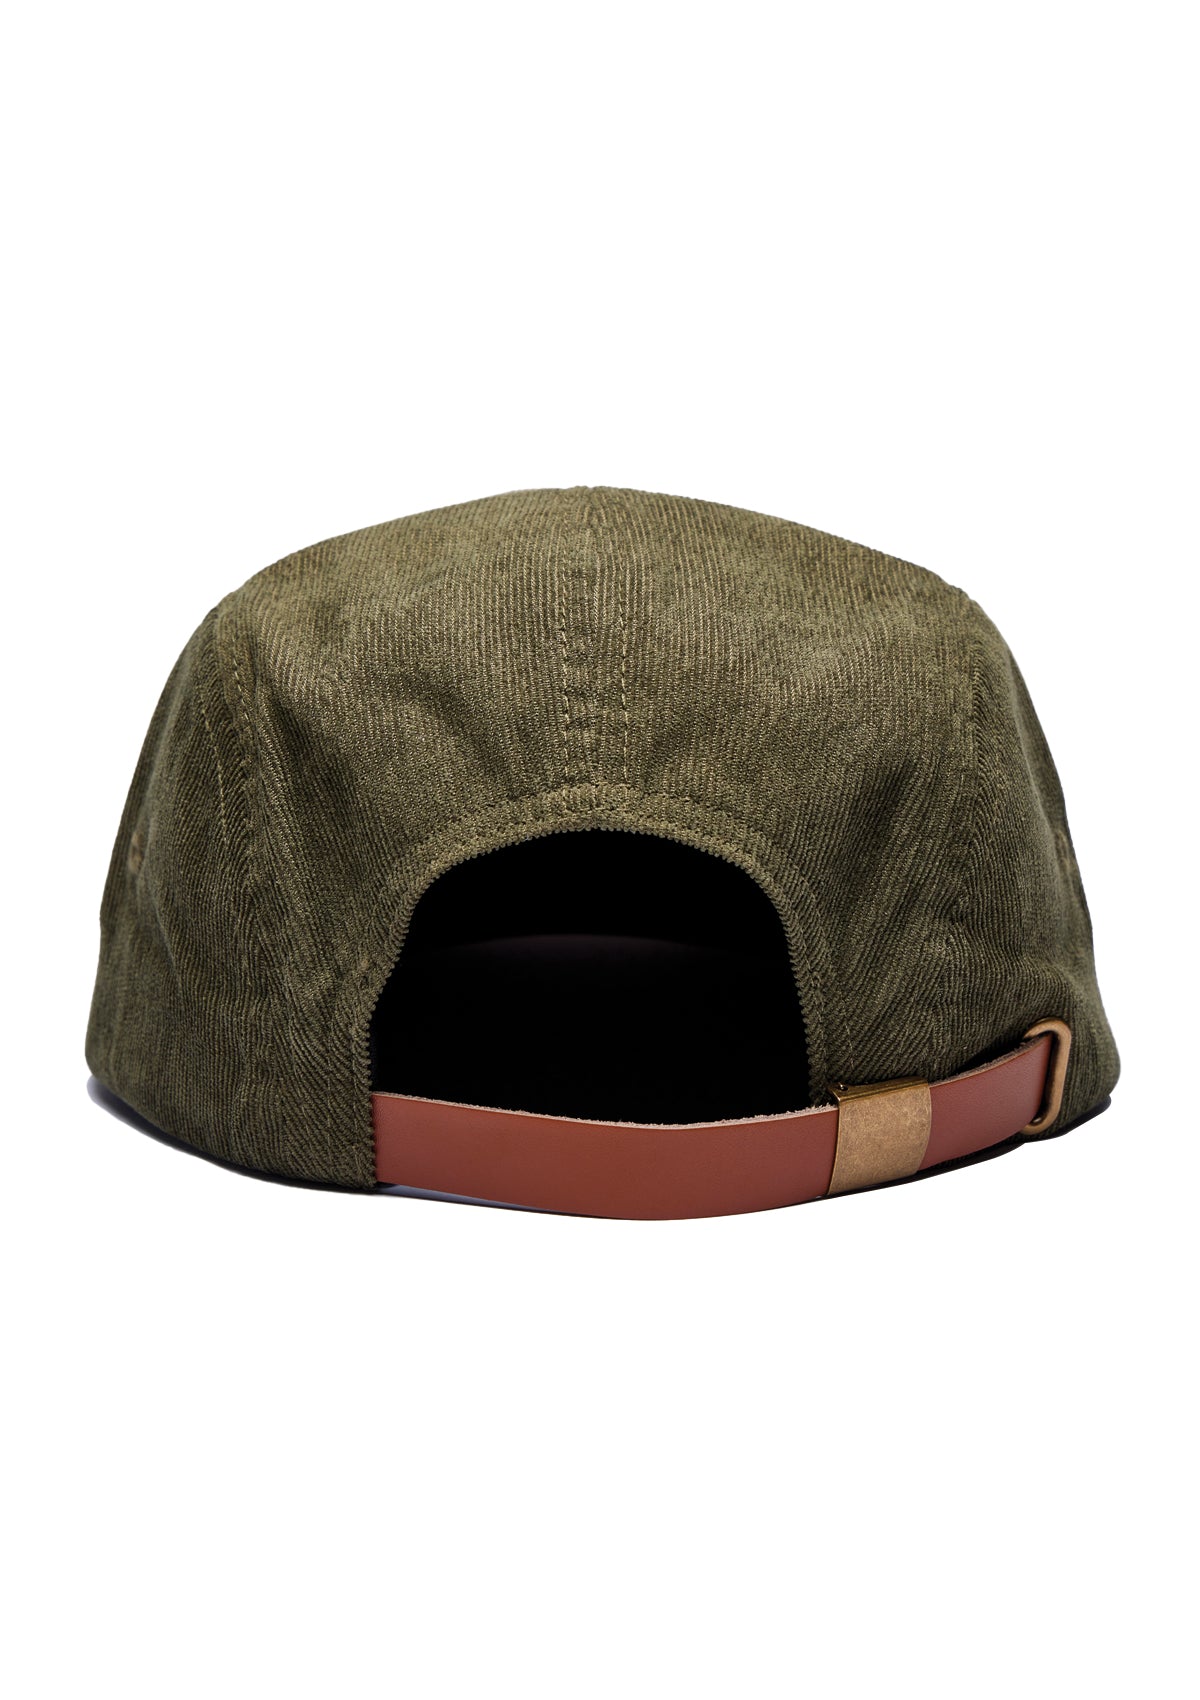 Washed Cord Cap - Dune Grass